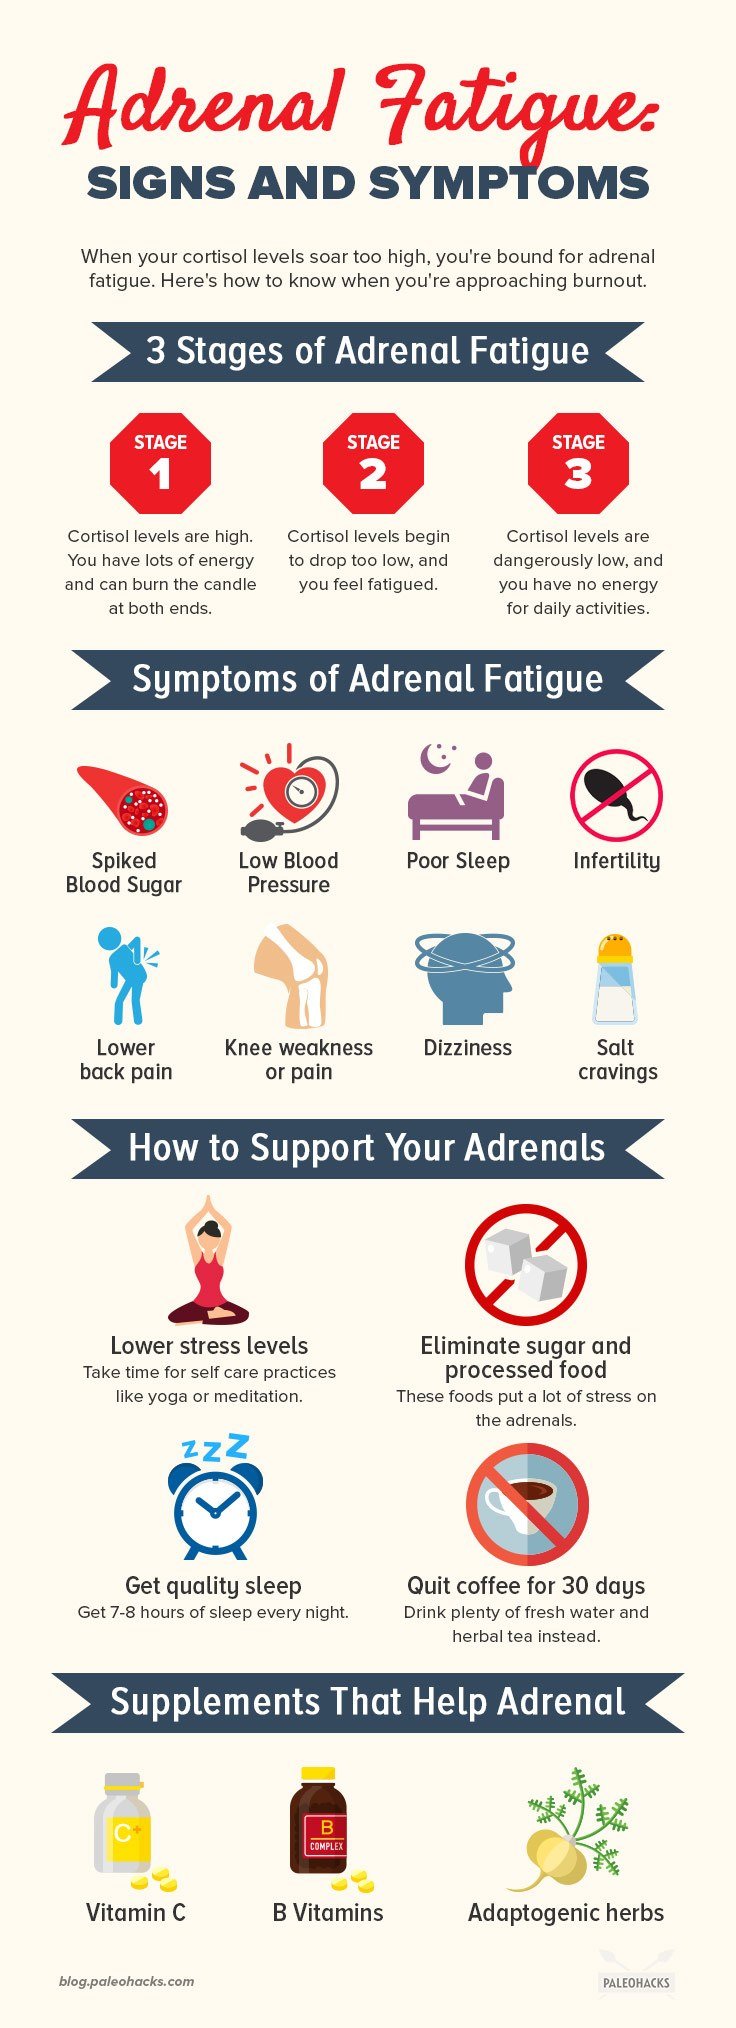 When your cortisol levels soar too high, you're bound for adrenal fatigue. Here's how to know when you're approaching burnout, and what to do about it.